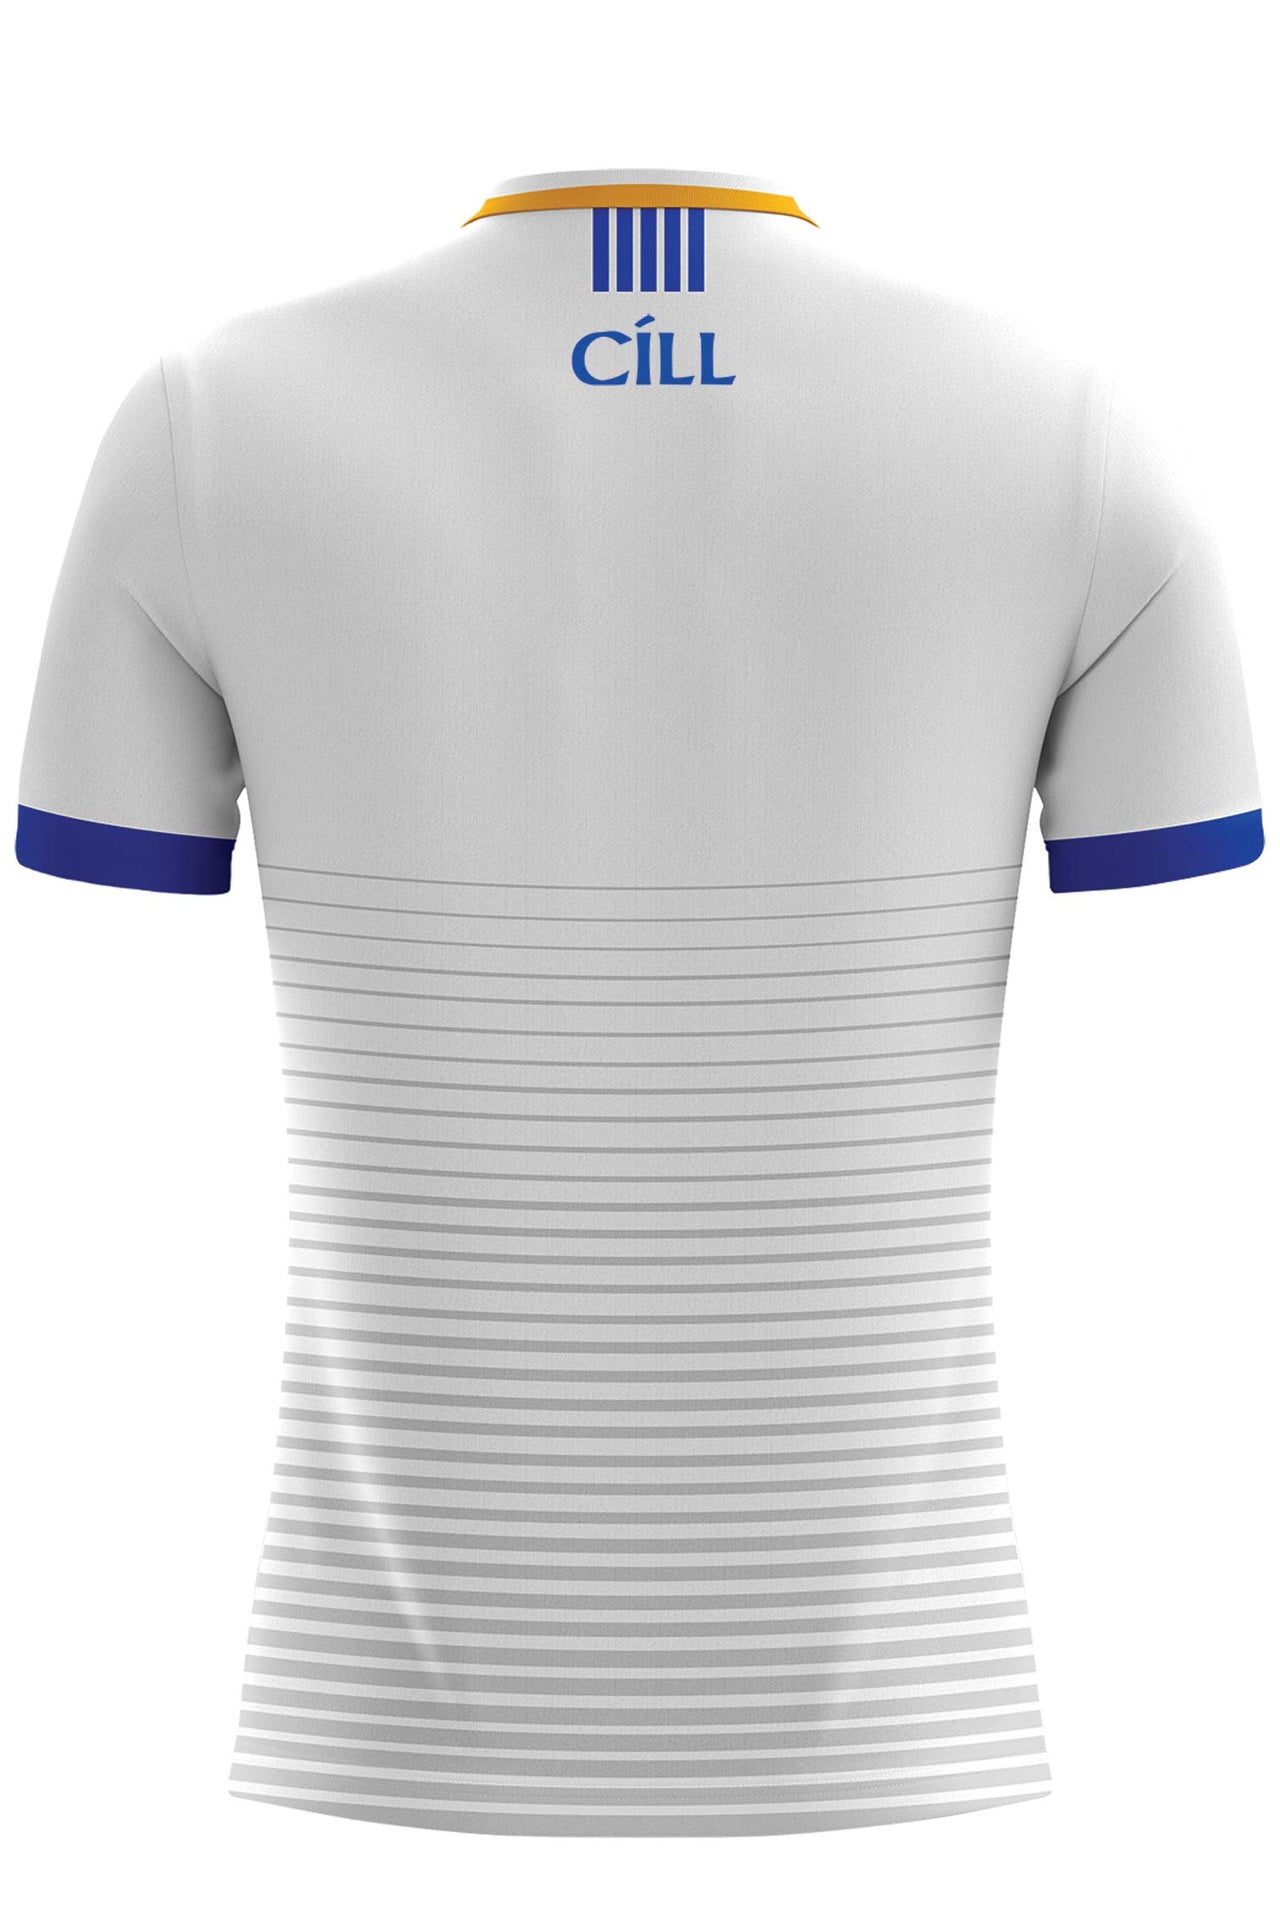 Keel GAA Home Jersey Player Fit Adult